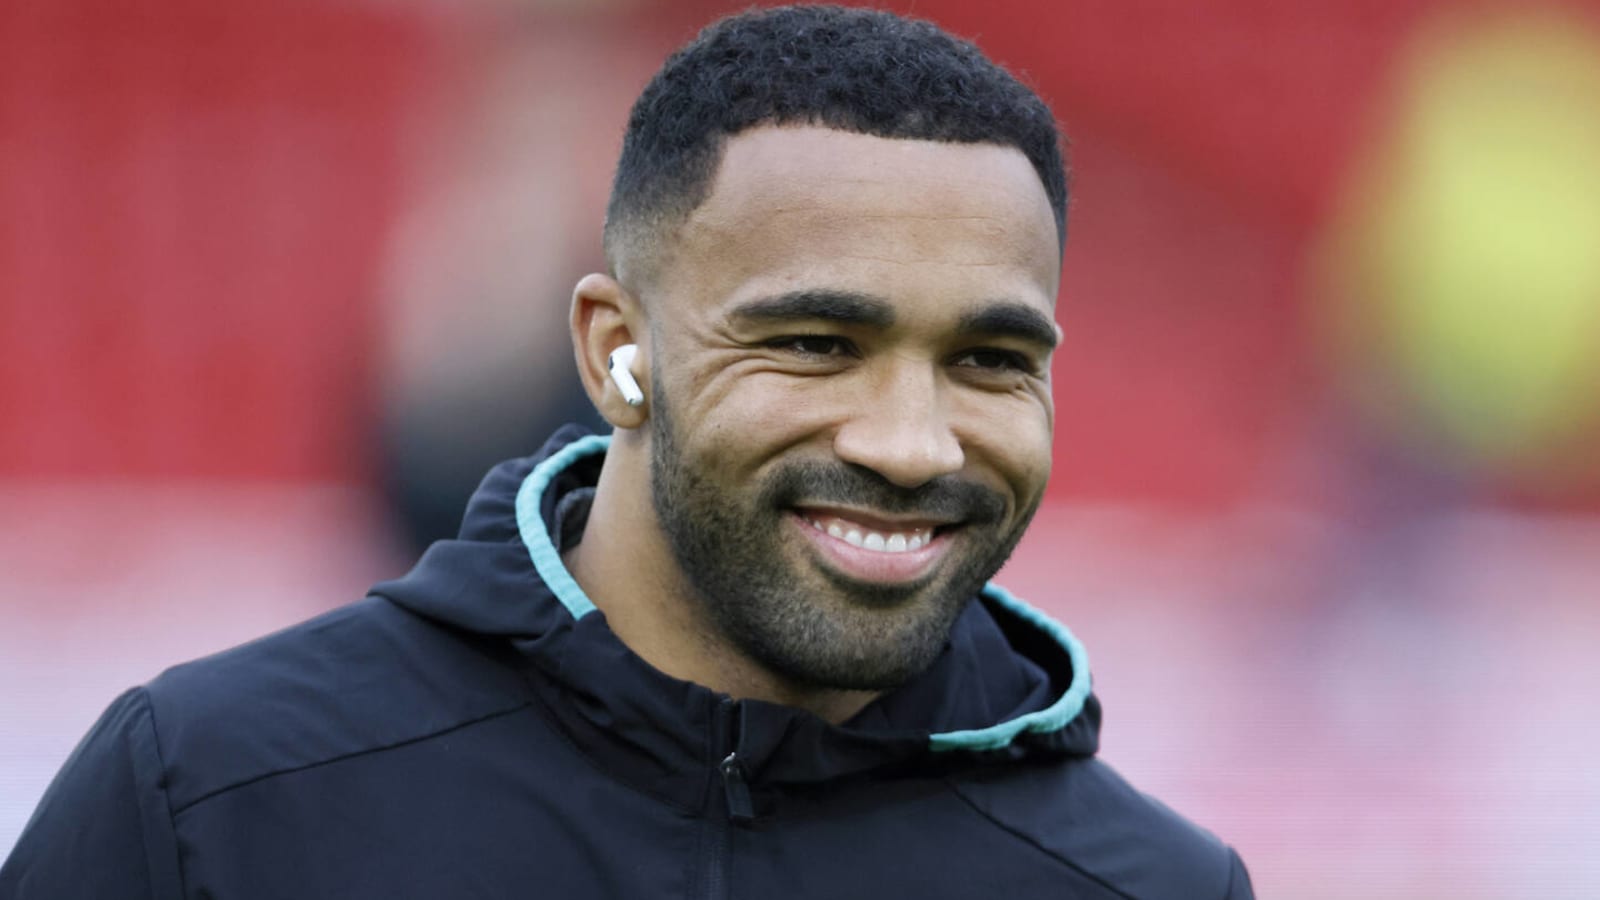 Premier League giants are looking at Callum Wilson as a potential summer signing